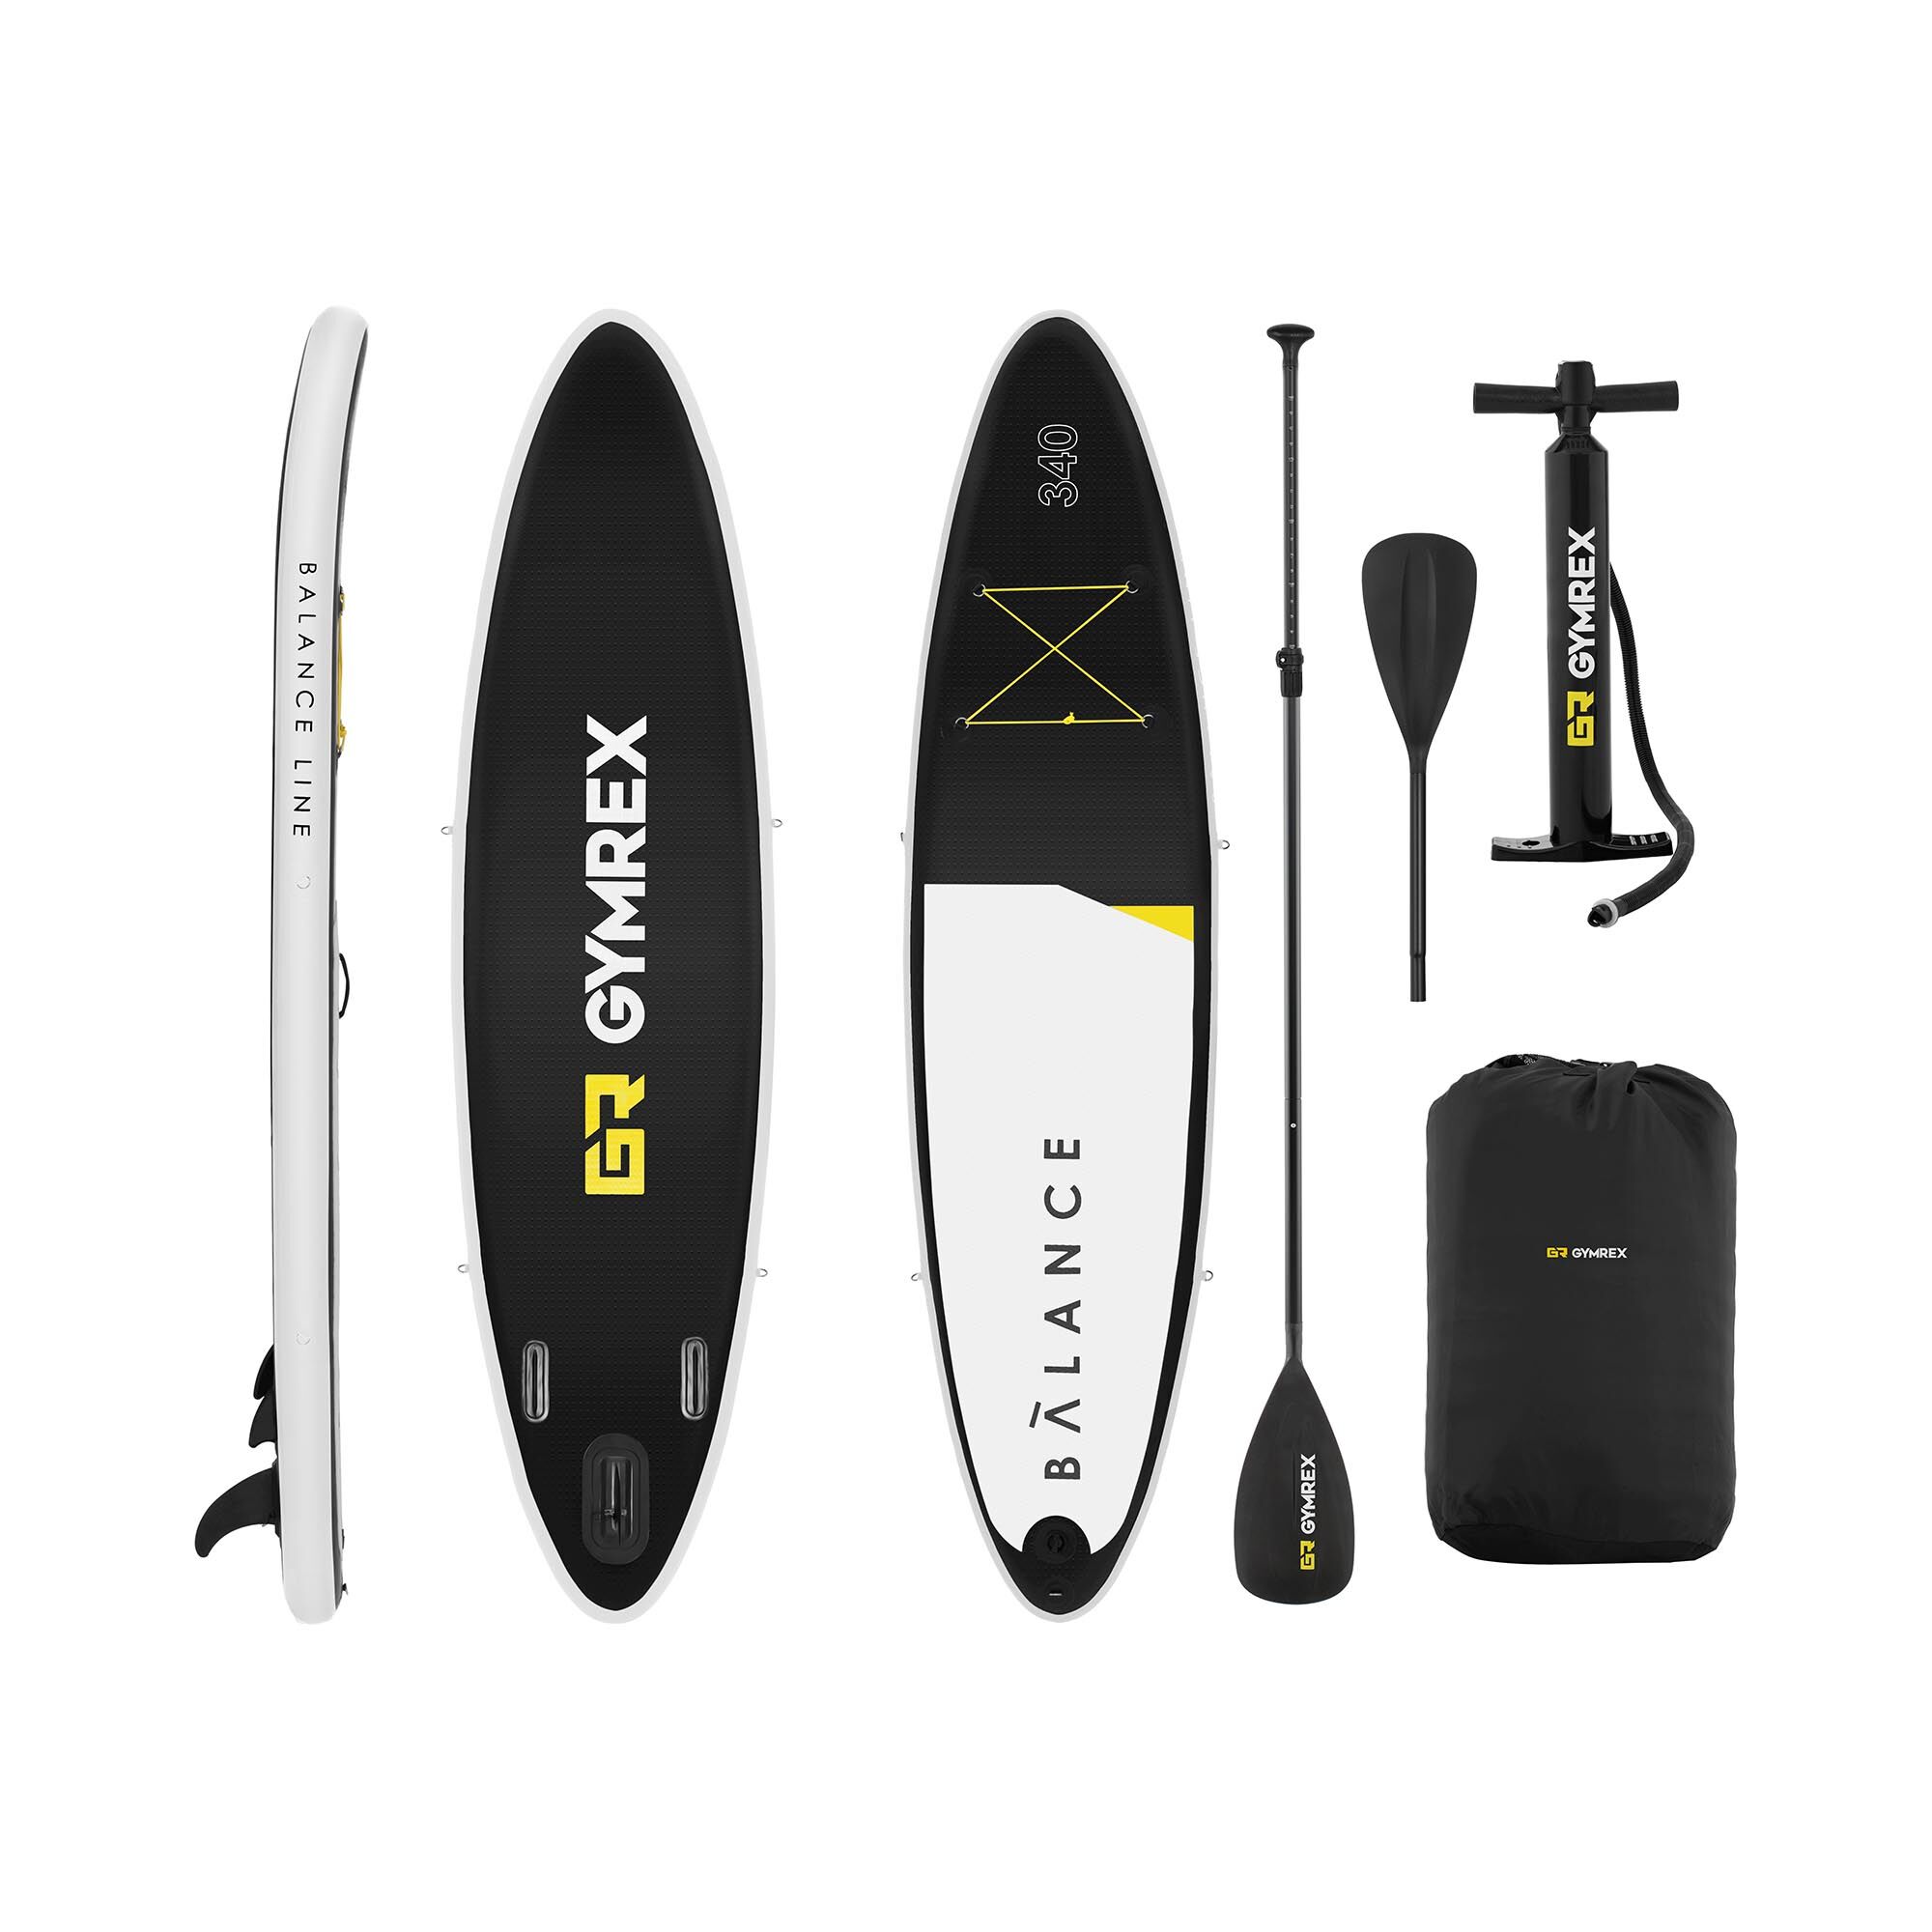 Gymrex Stand up paddle gonflable - 145 kg - 335 x 79 x 15 cm GR-SPB340